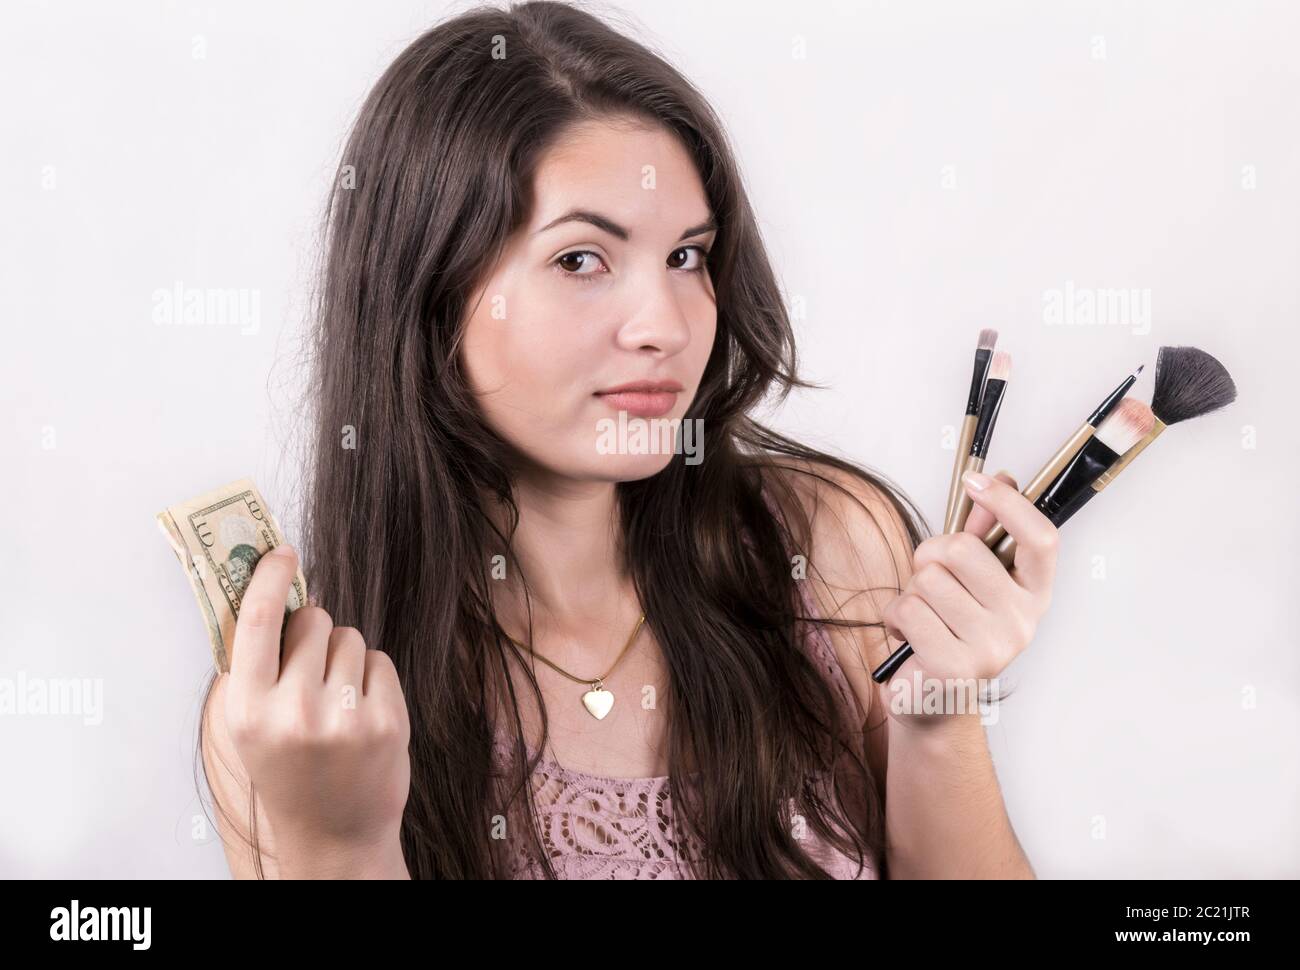 A young girl with a funny expression on her face  while holding money in one hand and make up brushes in the other. Stock Photo